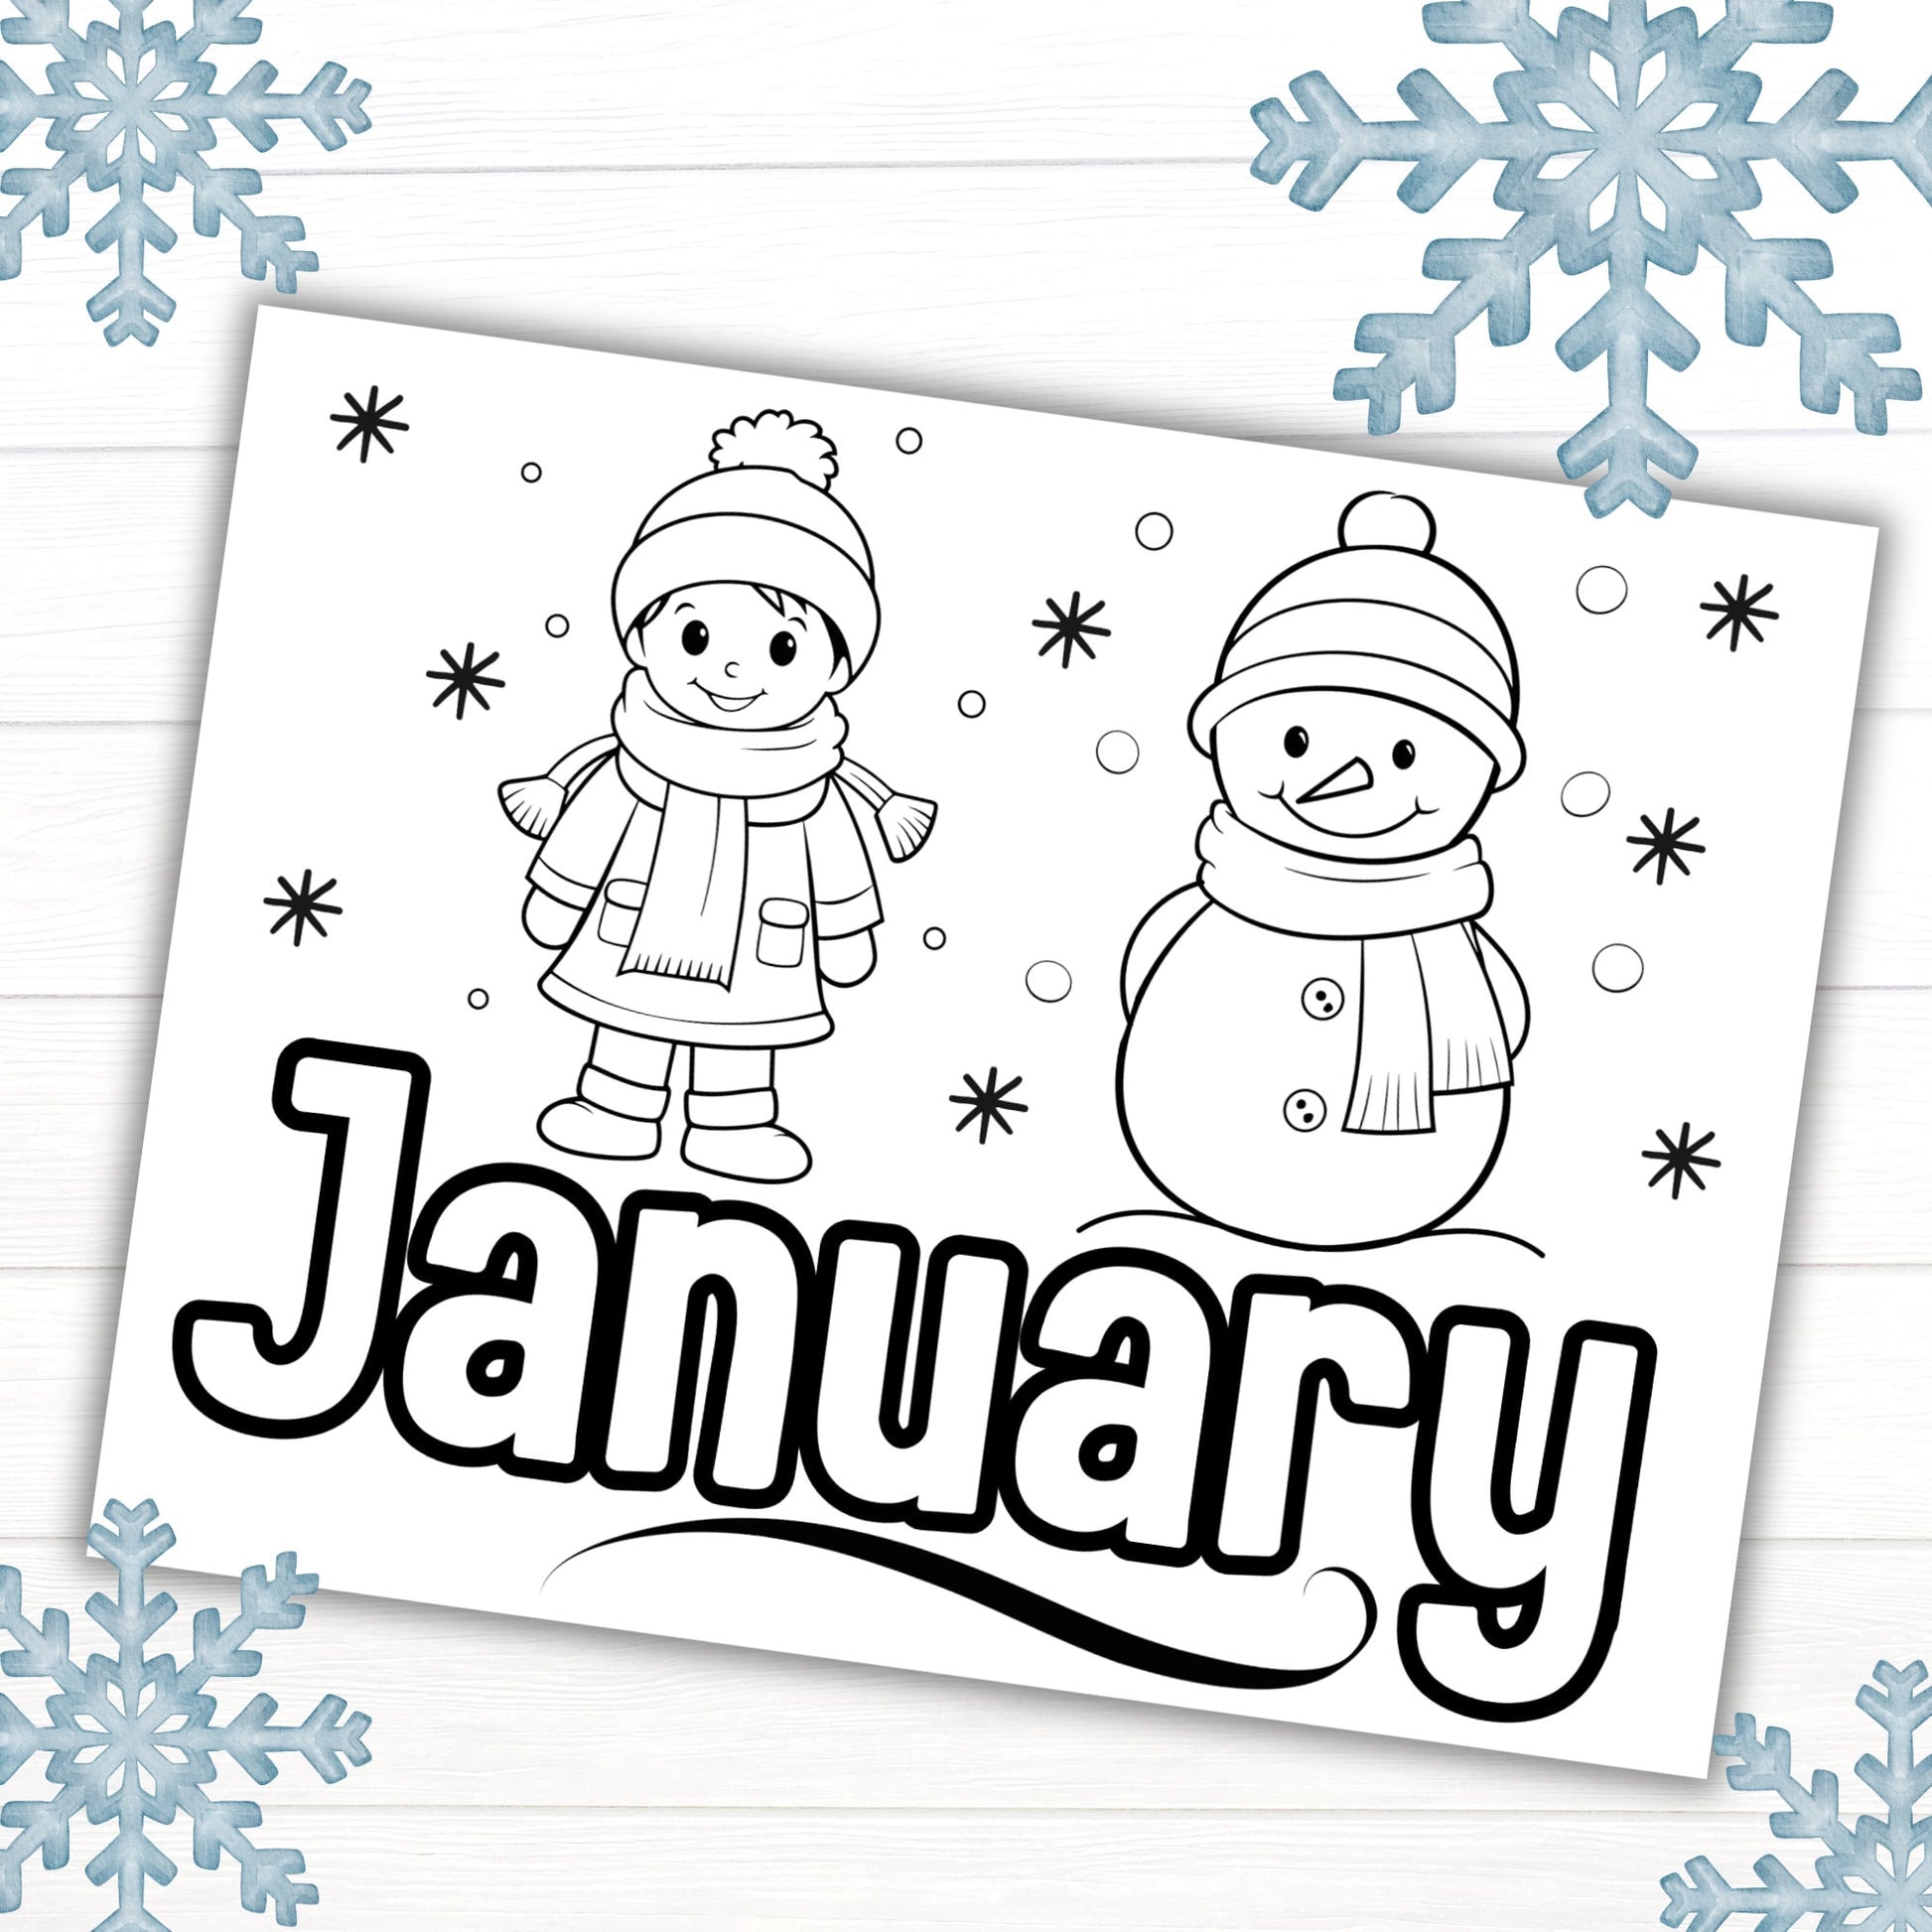 January Coloring Page, Month of January Coloring Page, Winter Coloring Pages for Kids, Printable Calendar Pages, January Activities